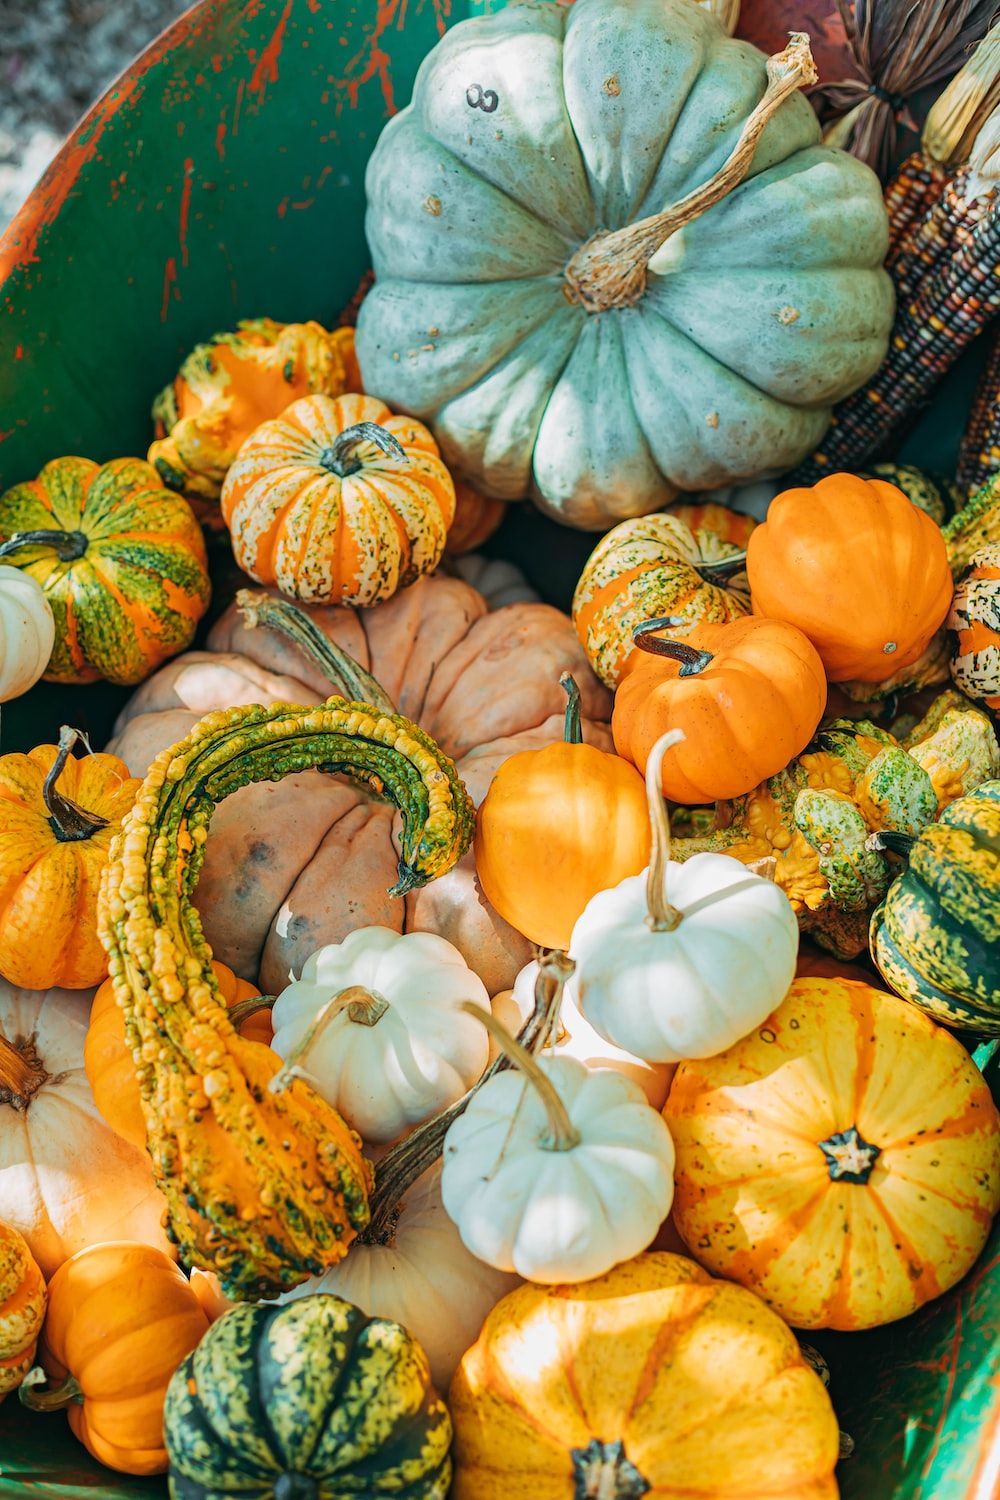 Pumpkins Picture. Download Free Image